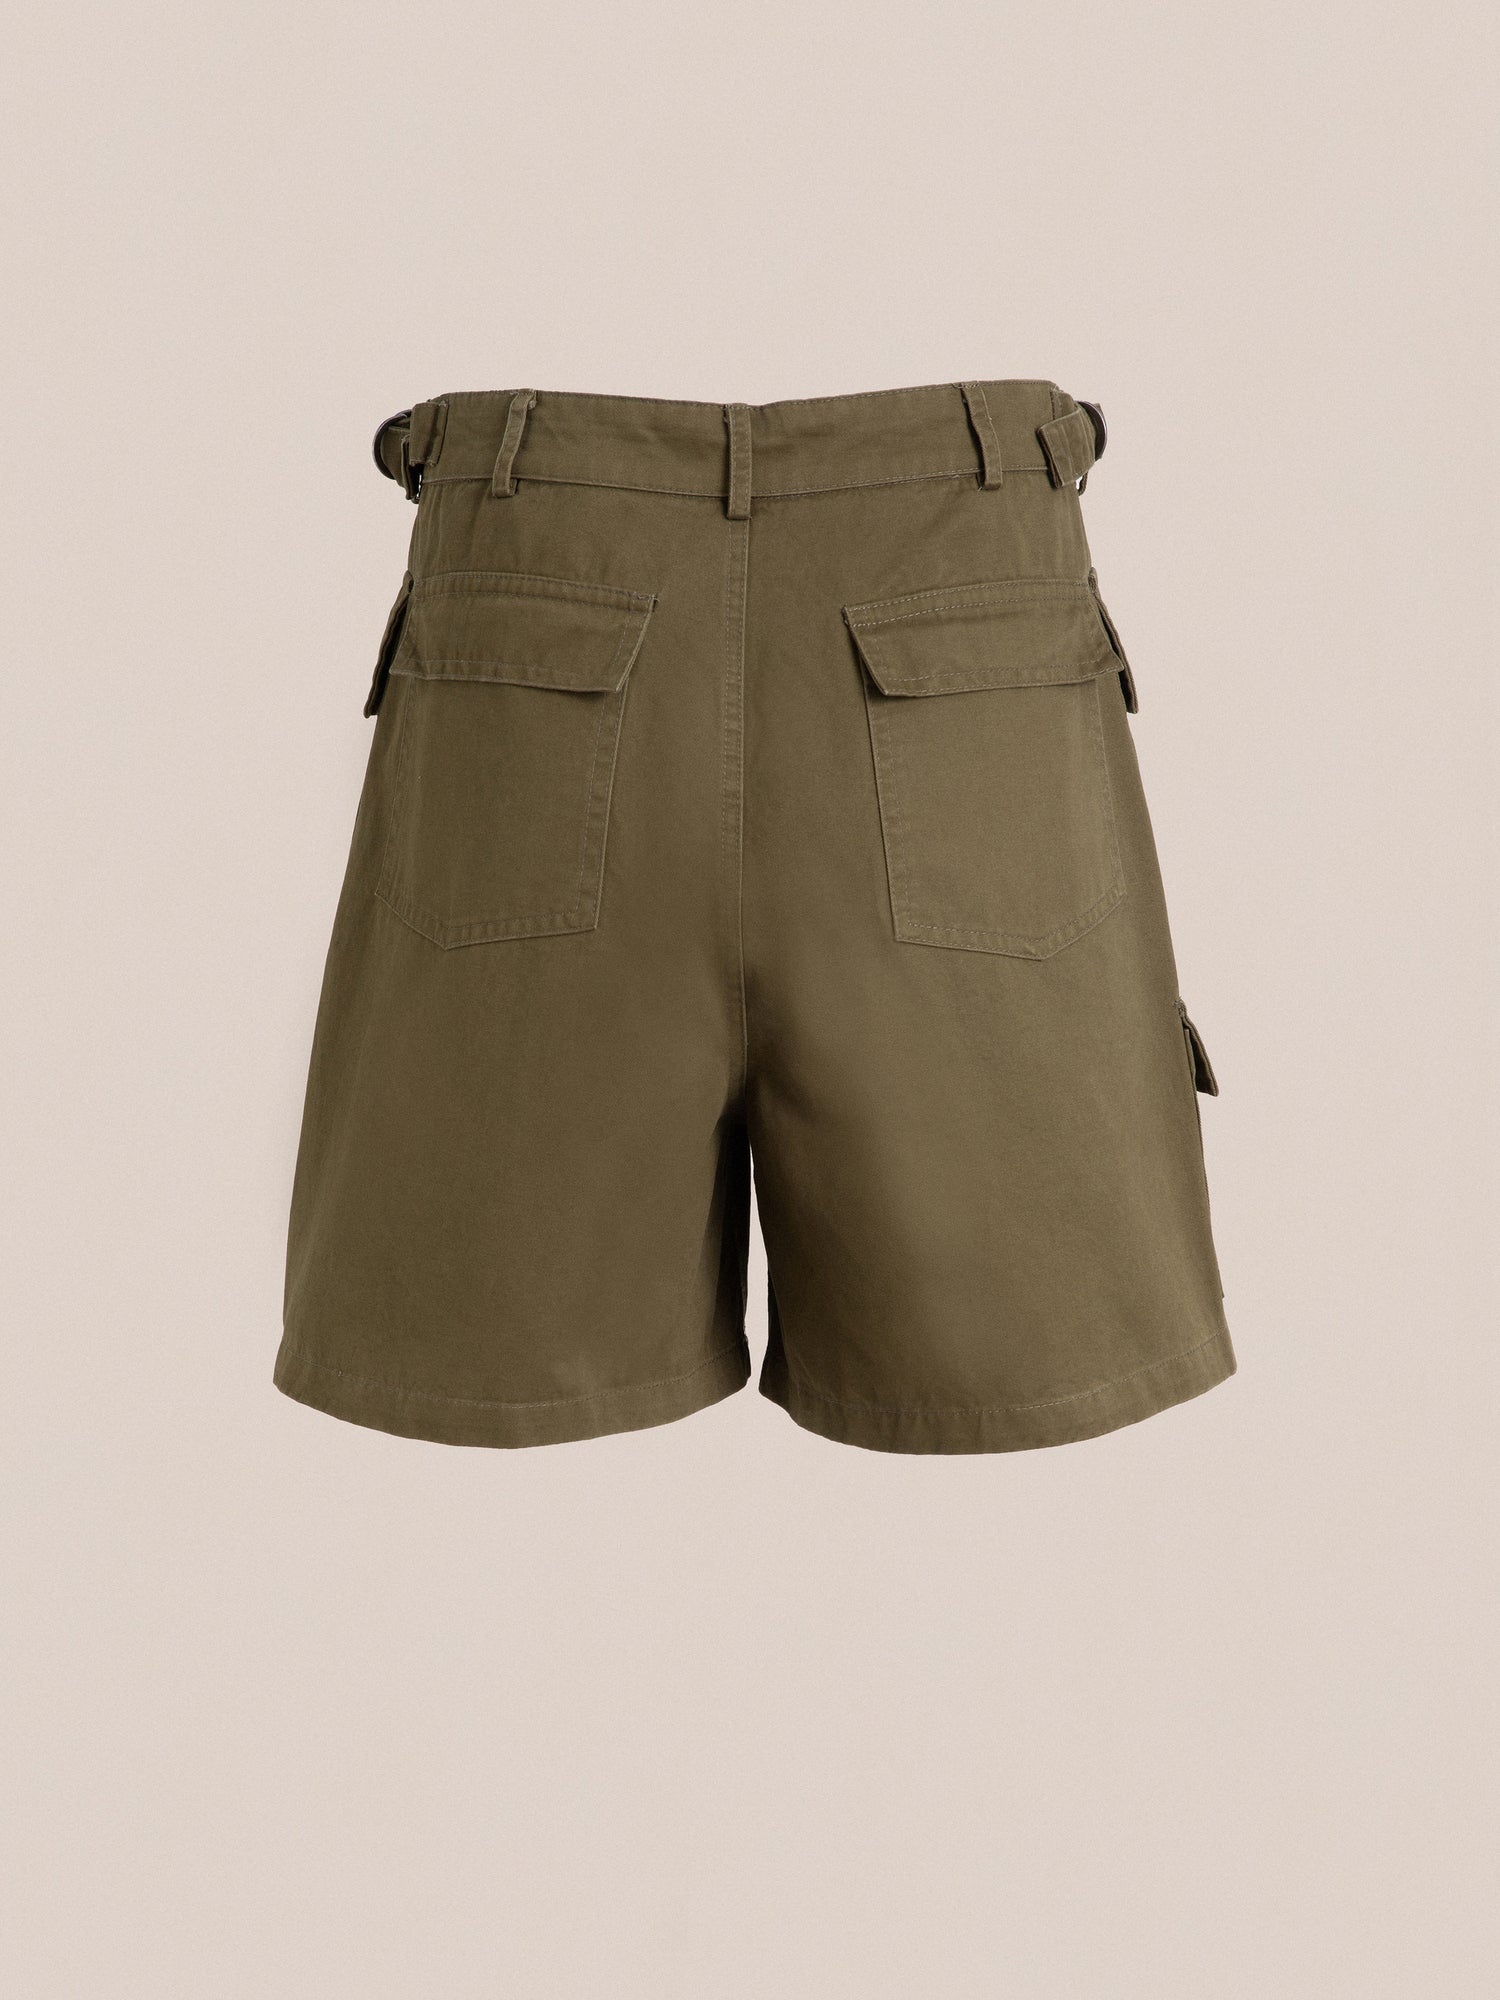 The women's Found Twill Cargo Shorts in olive green feature adjustable waist tabs.